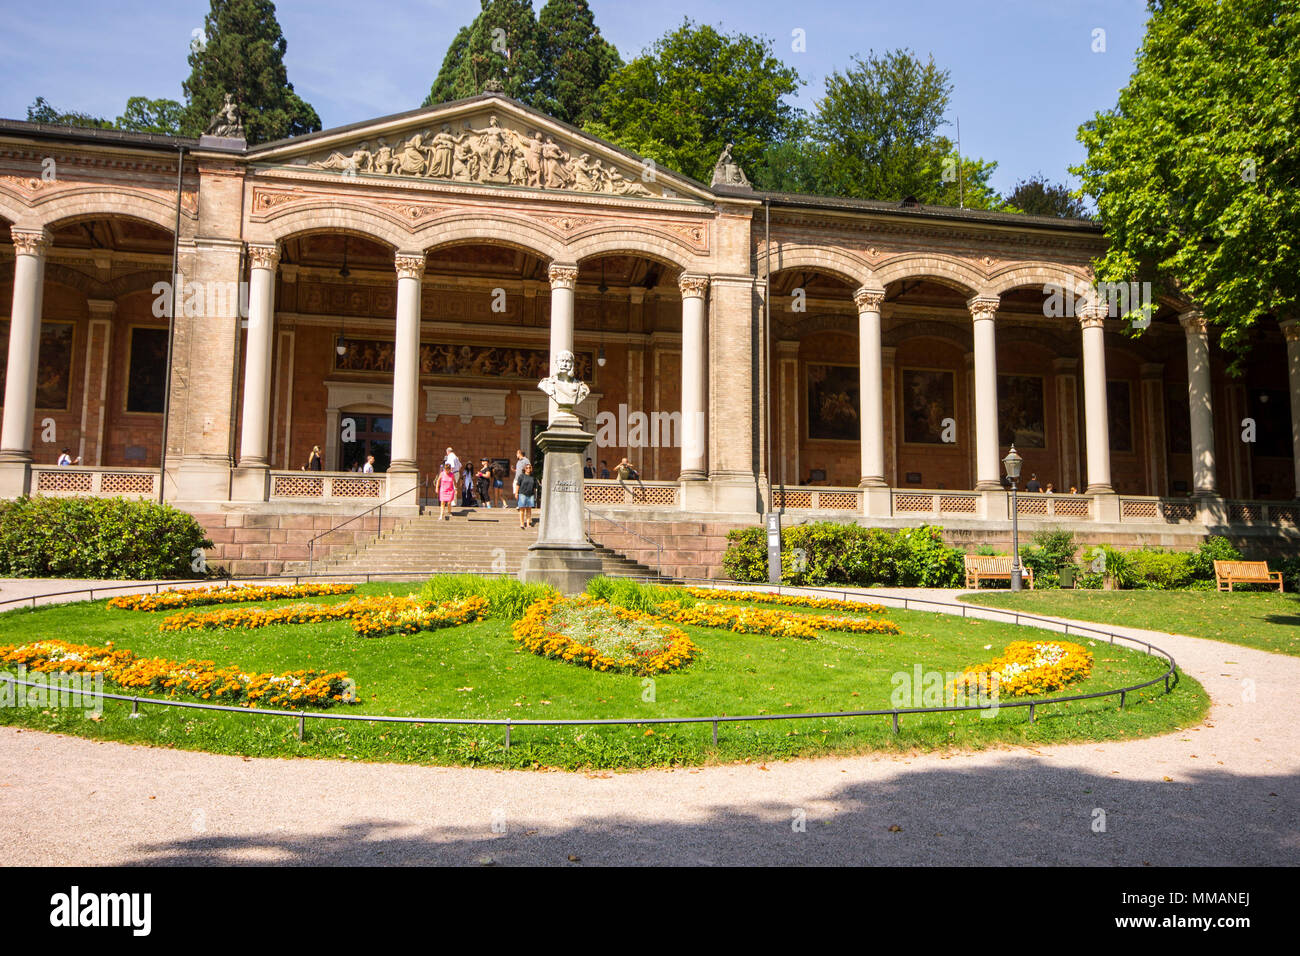 Baden-Baden, Germany. The Trinkhalle (Pump House), a building in the Kurhaus spa complex, with a 90-metre arcade colonnade lined with frescos and benc Stock Photo